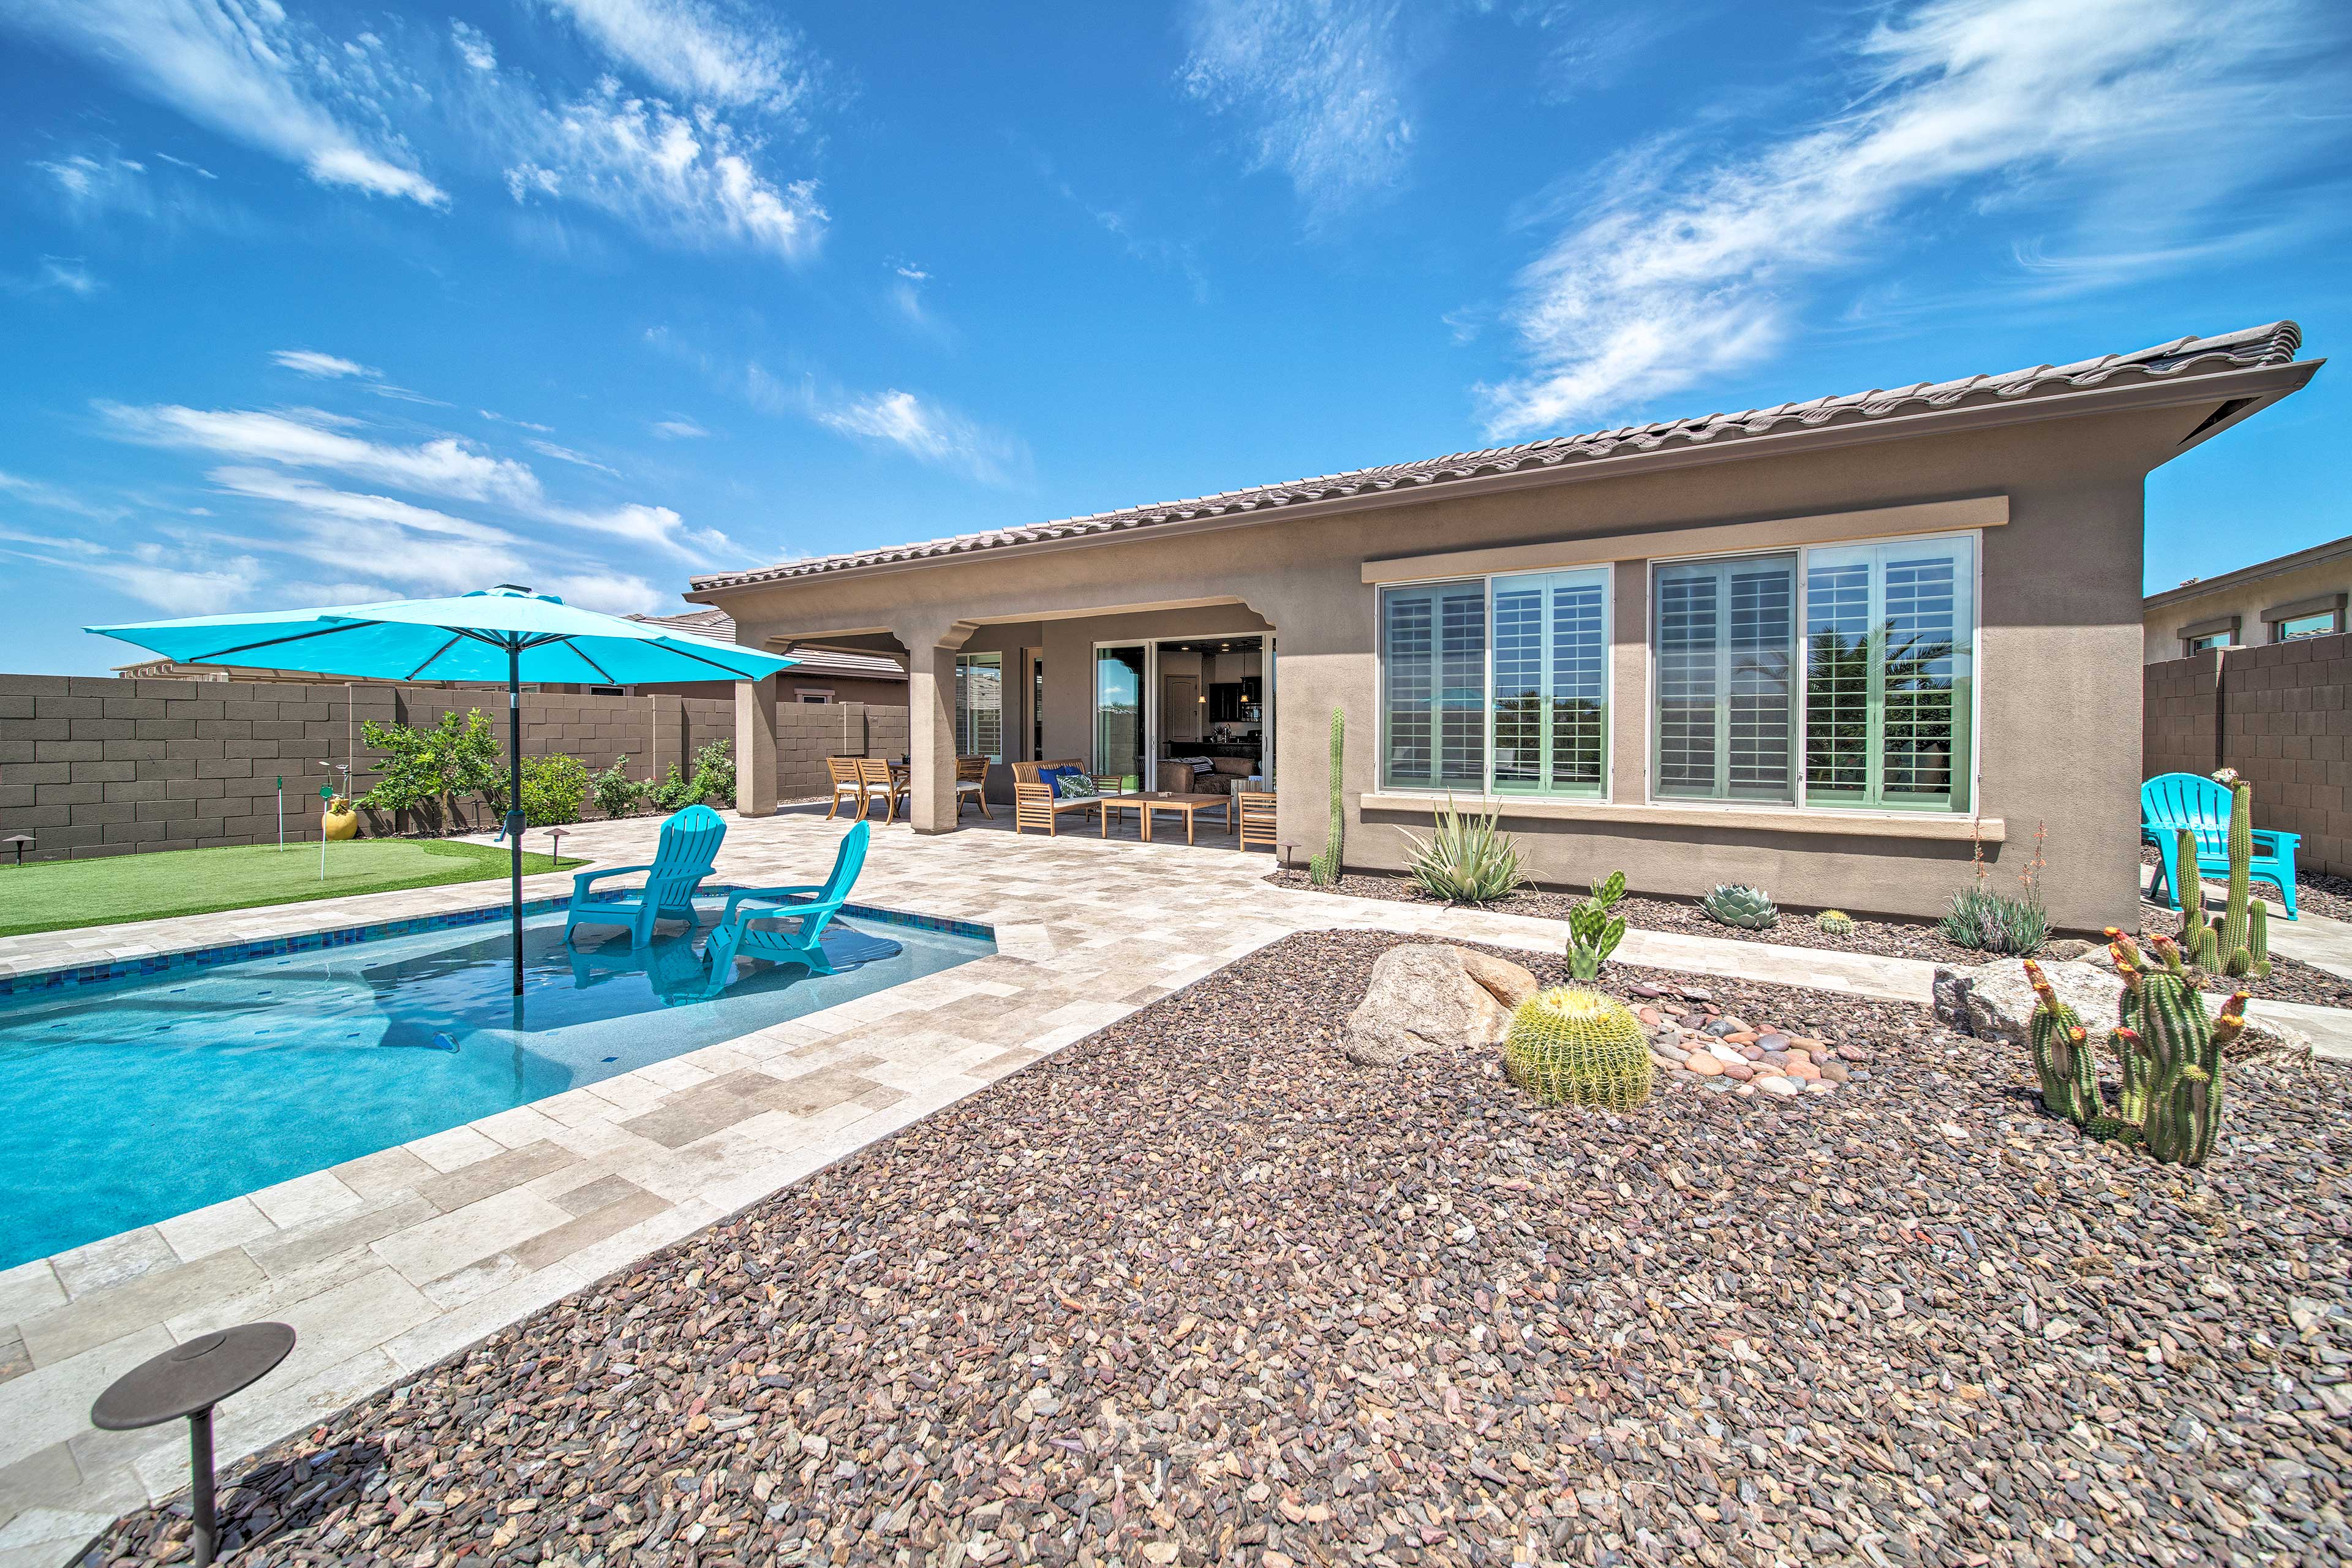 Desert landscaping surrounds the home.